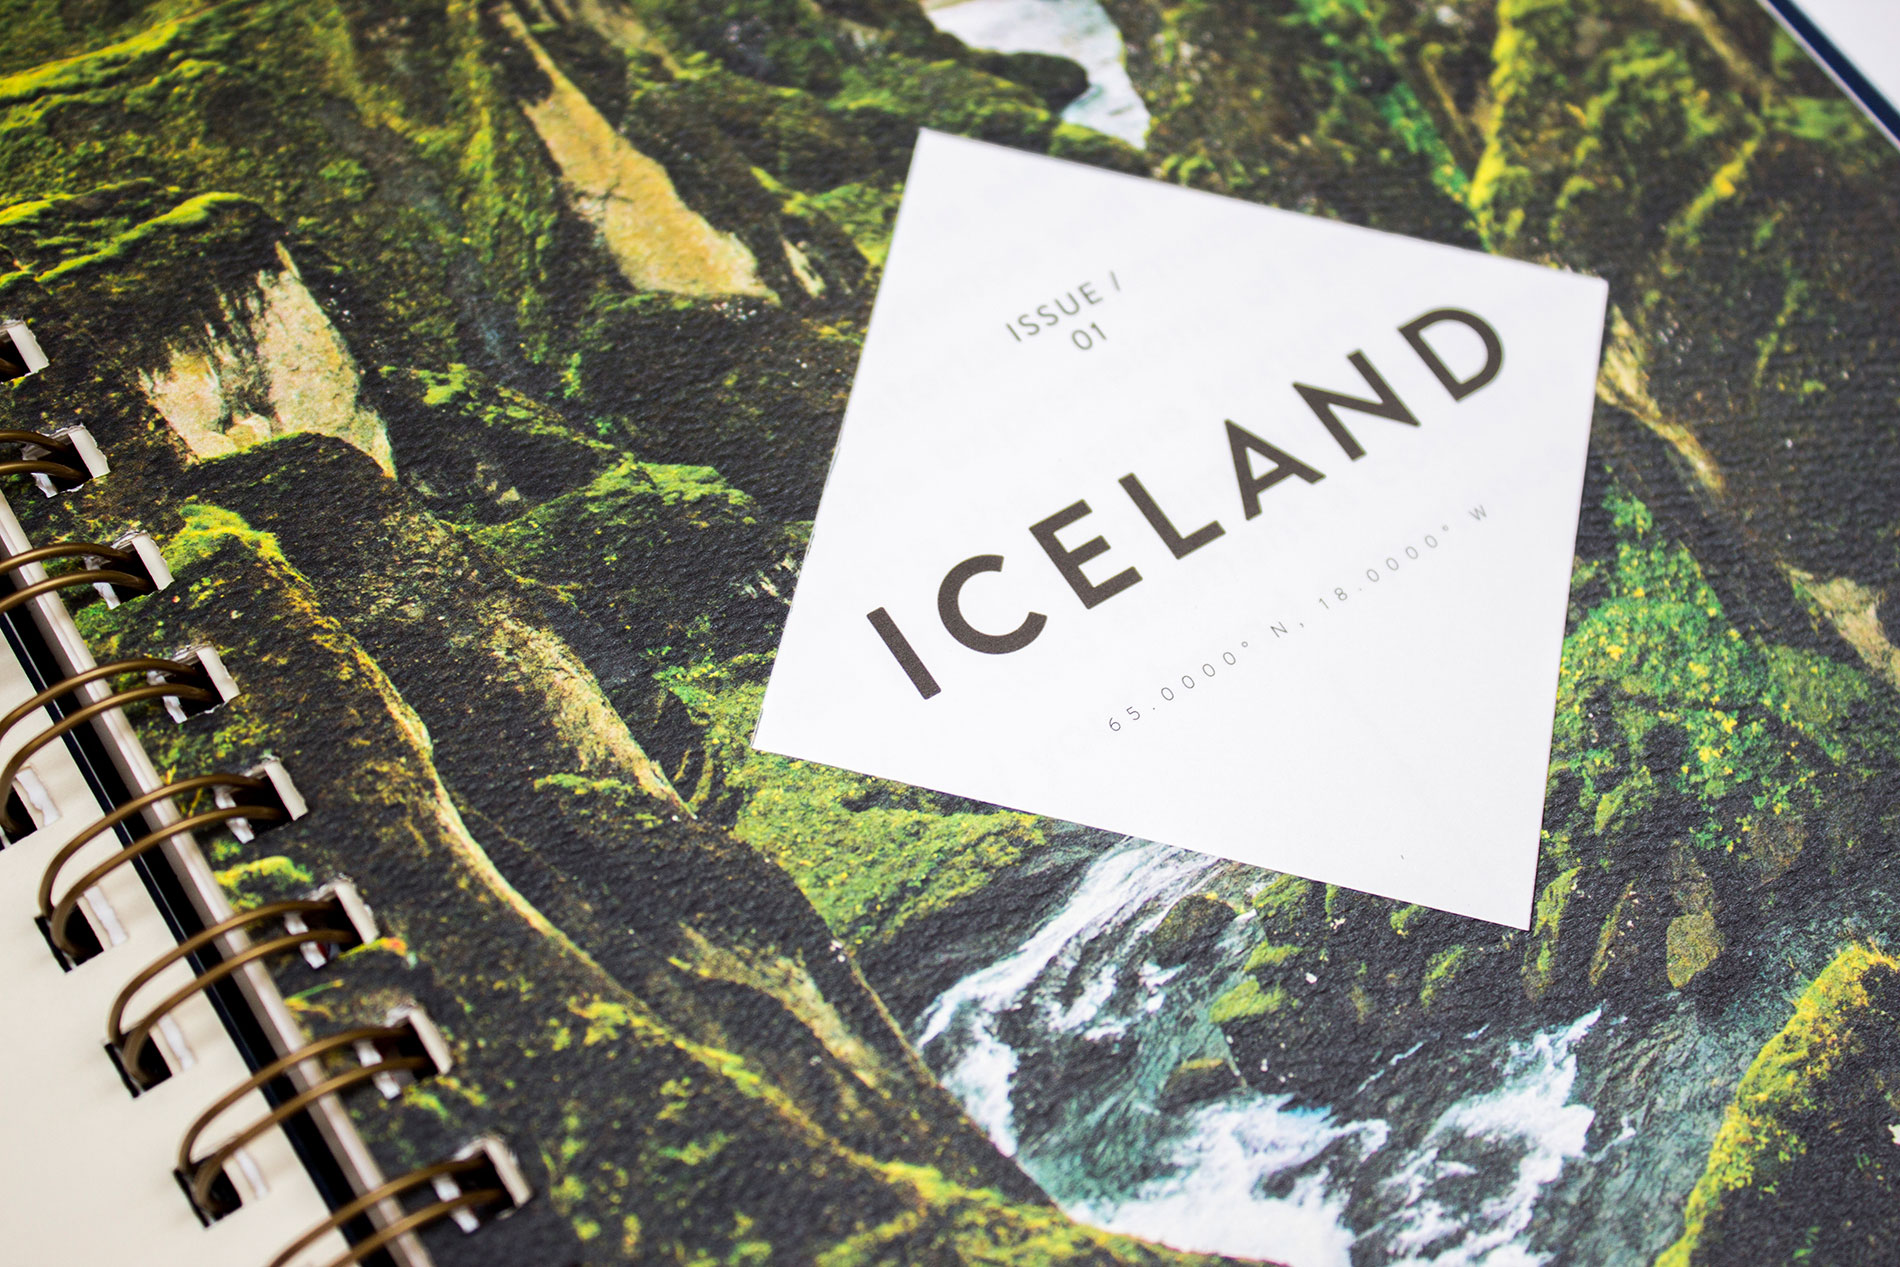 Close-up of the page that says "Iceland" with a landscape image